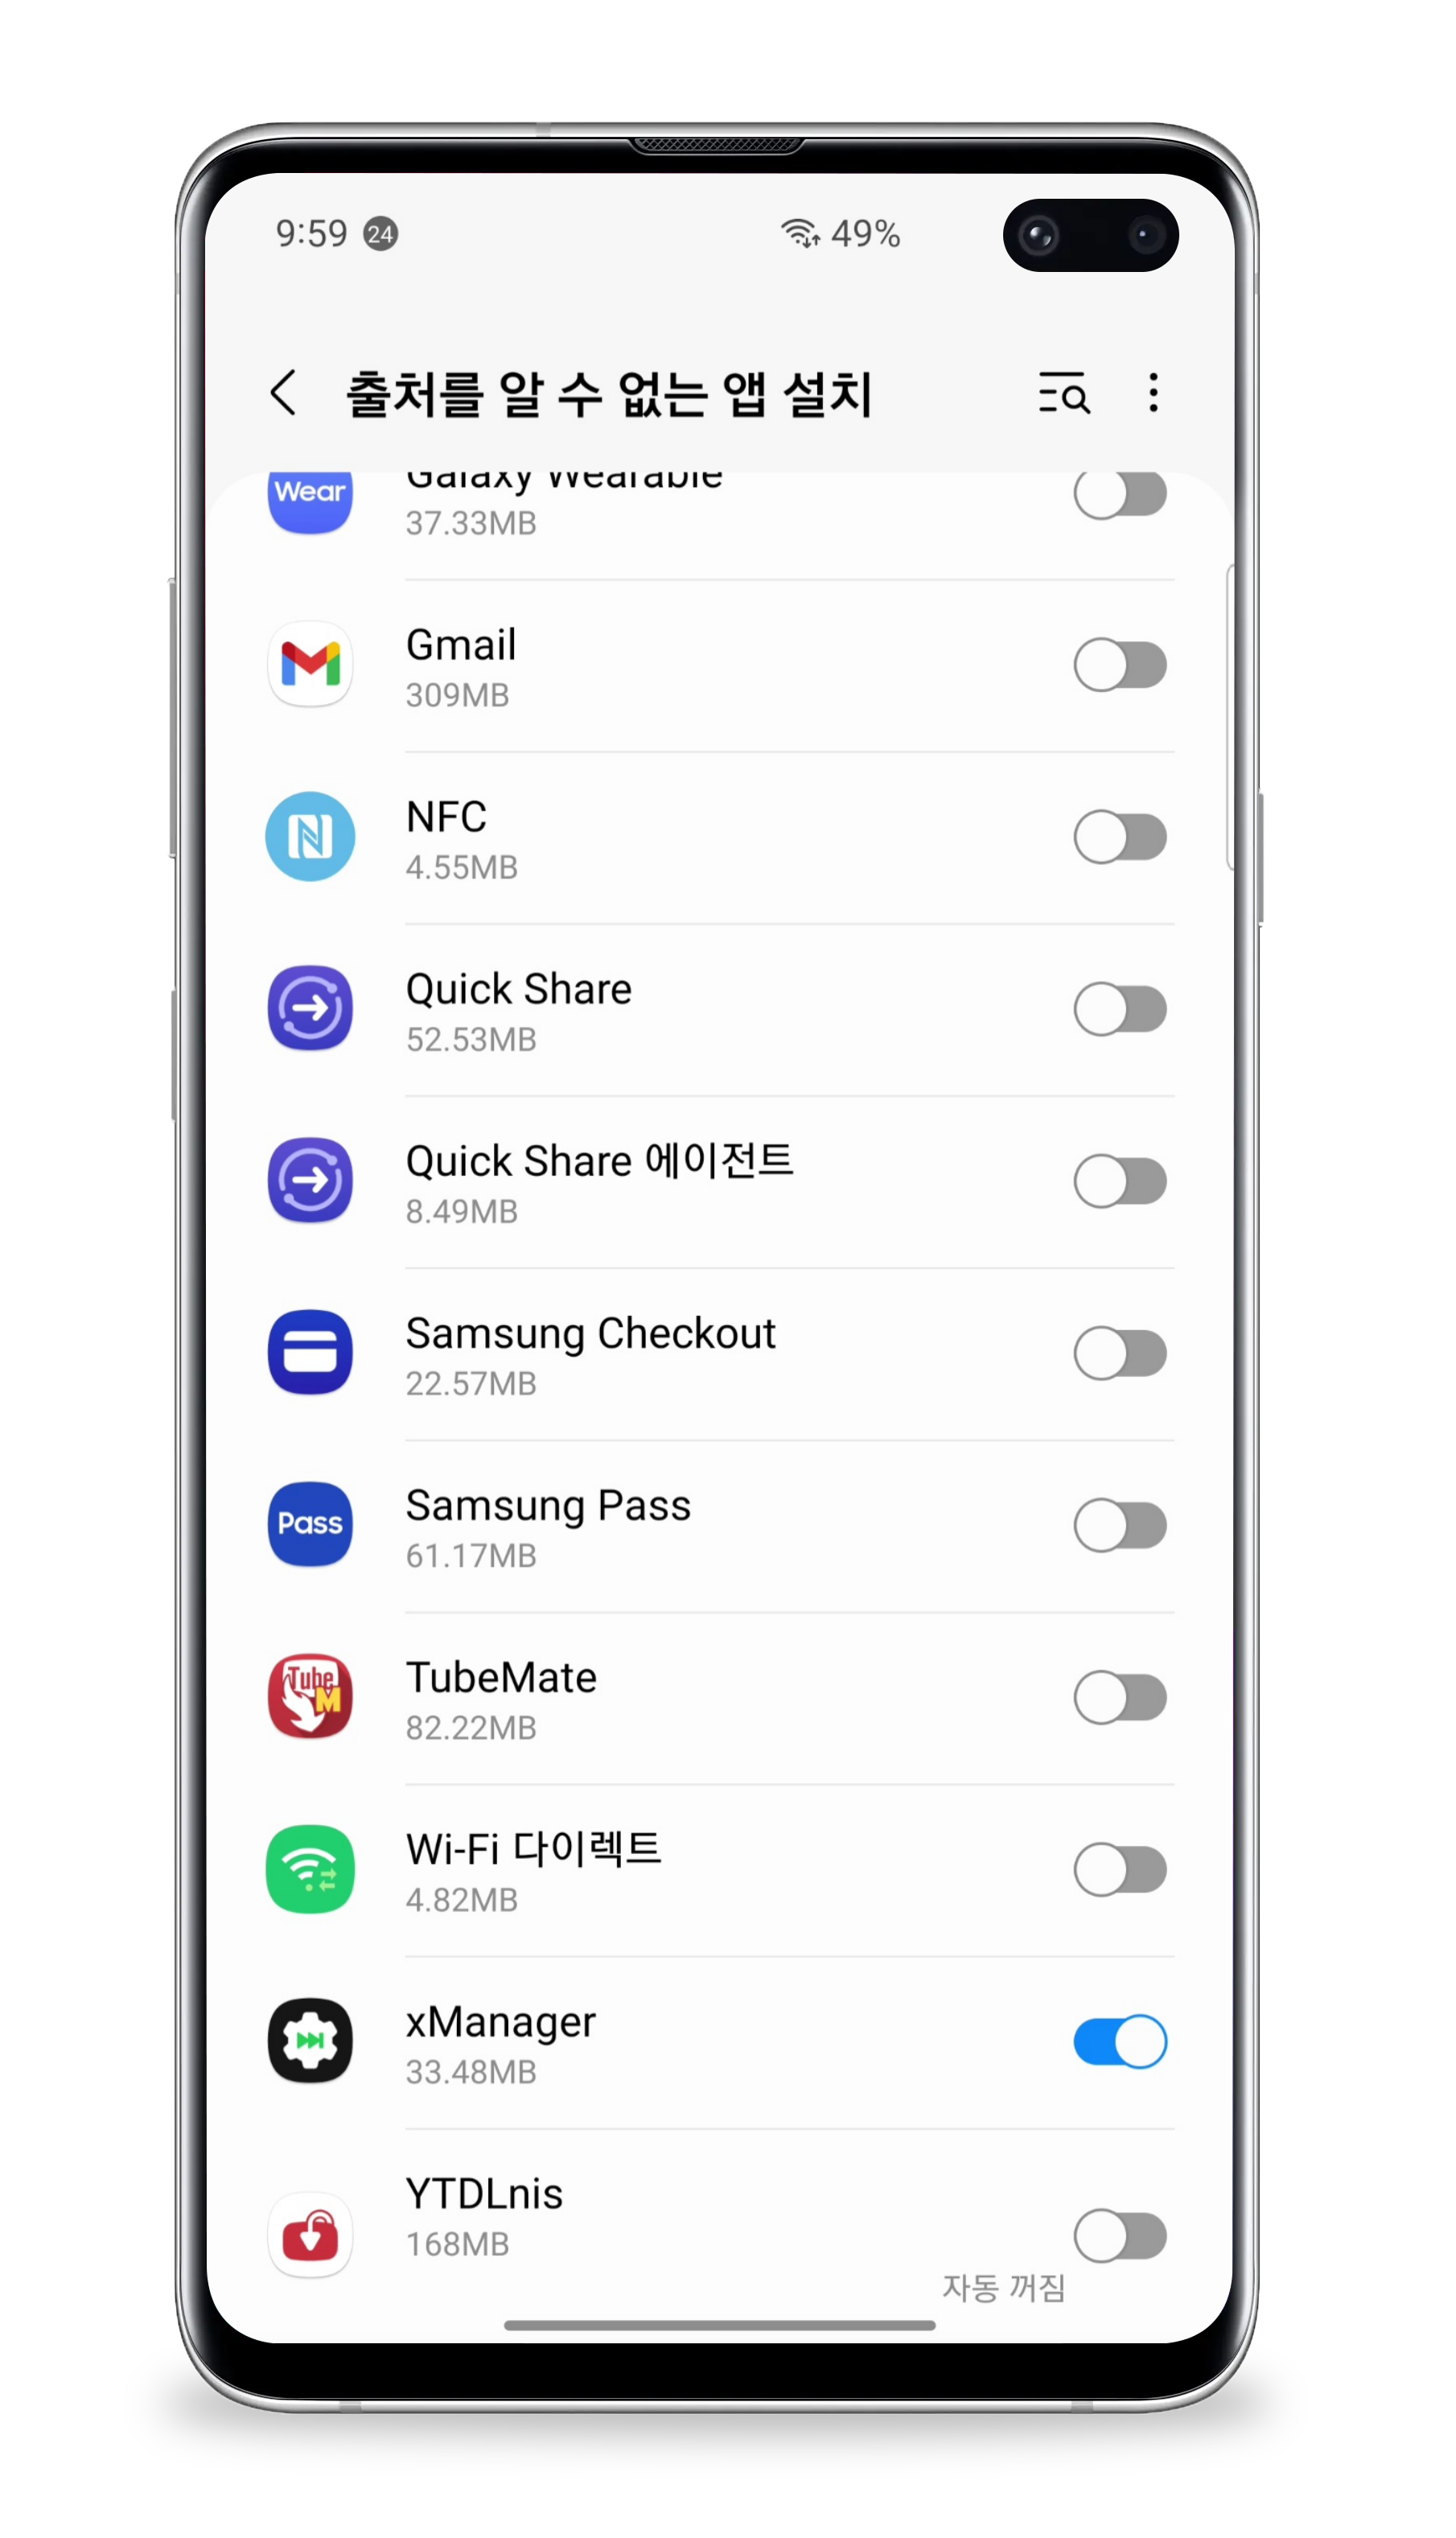 xmanager 세팅 창 4